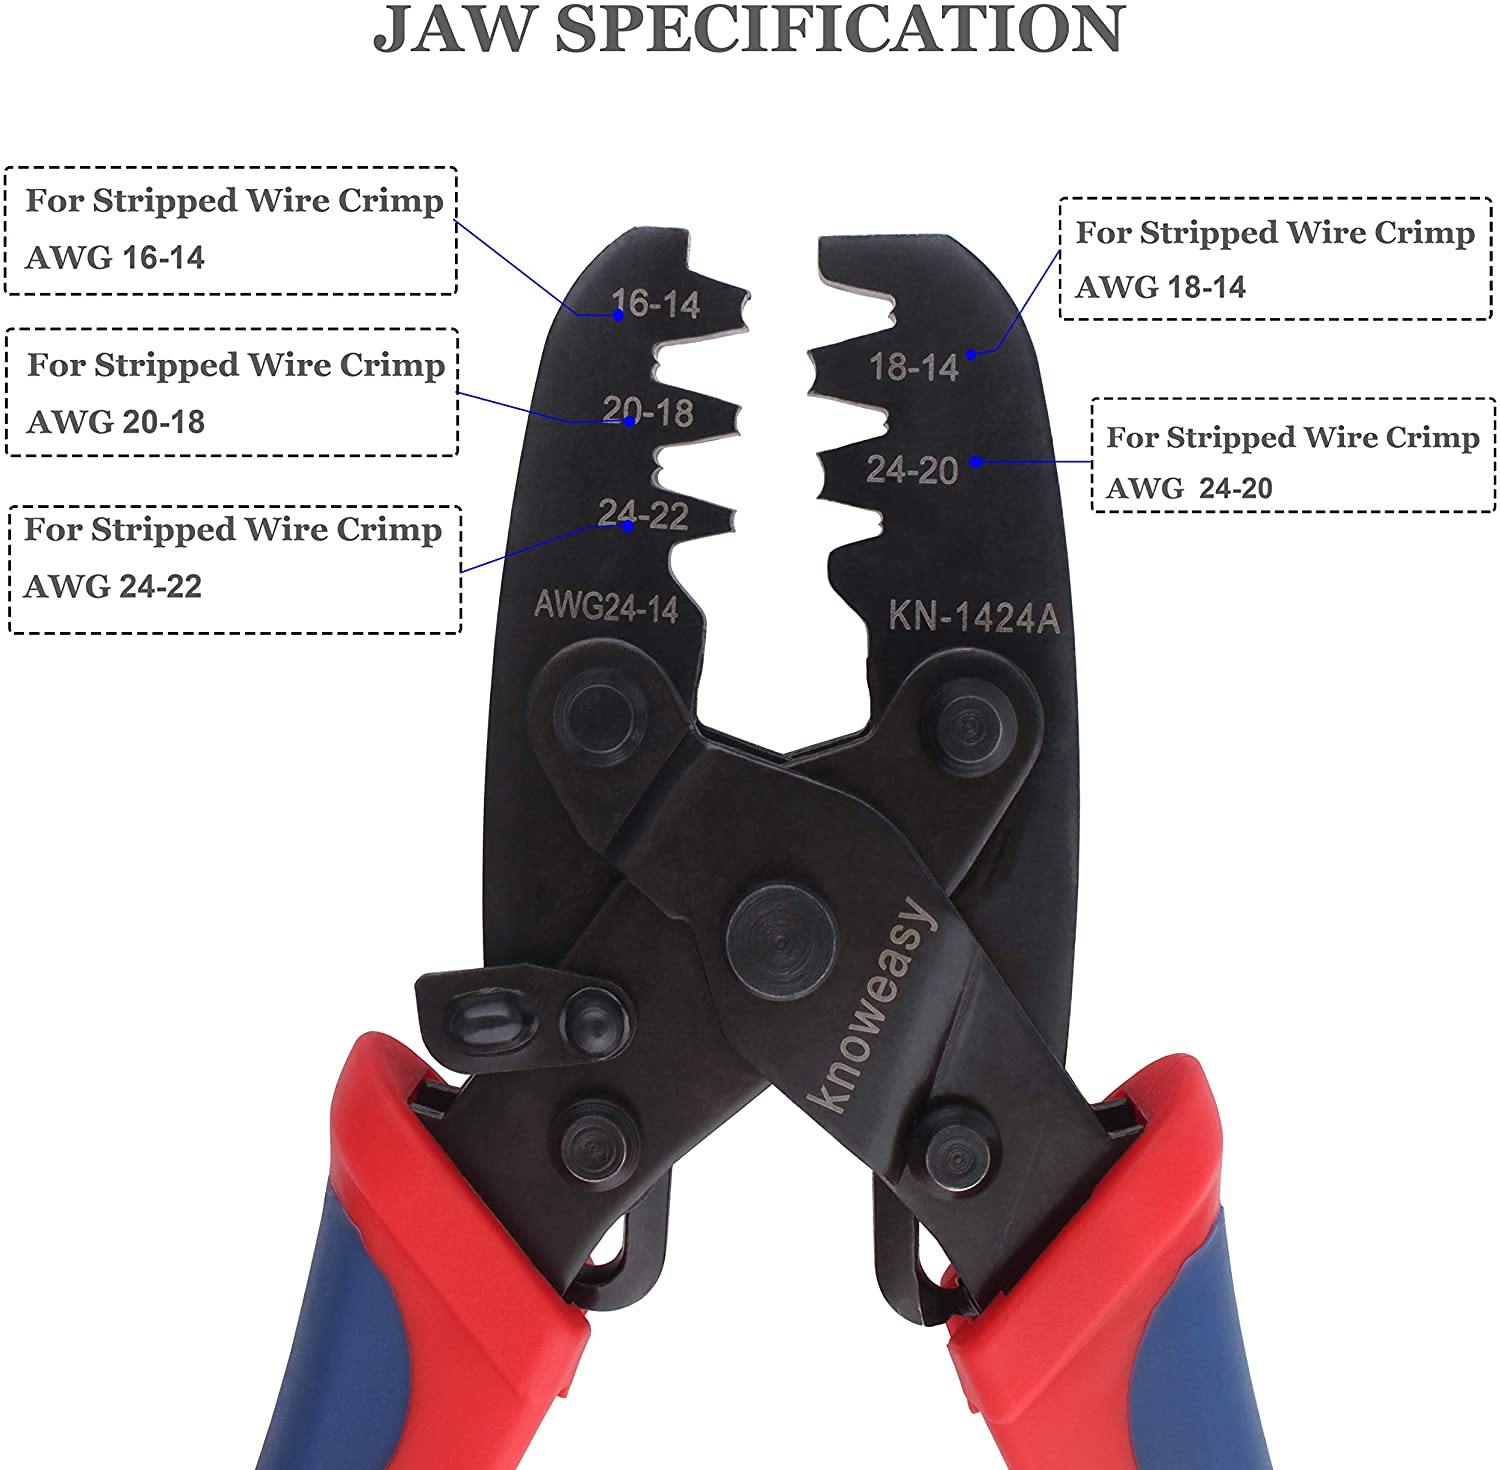 Hexagonal Crimper,Knoweasy 16-6 Crimping Tool and Hexagonal Wire Crimper  Used for 20-5 AWG/0.5-16 mm² Cable End Sleeves